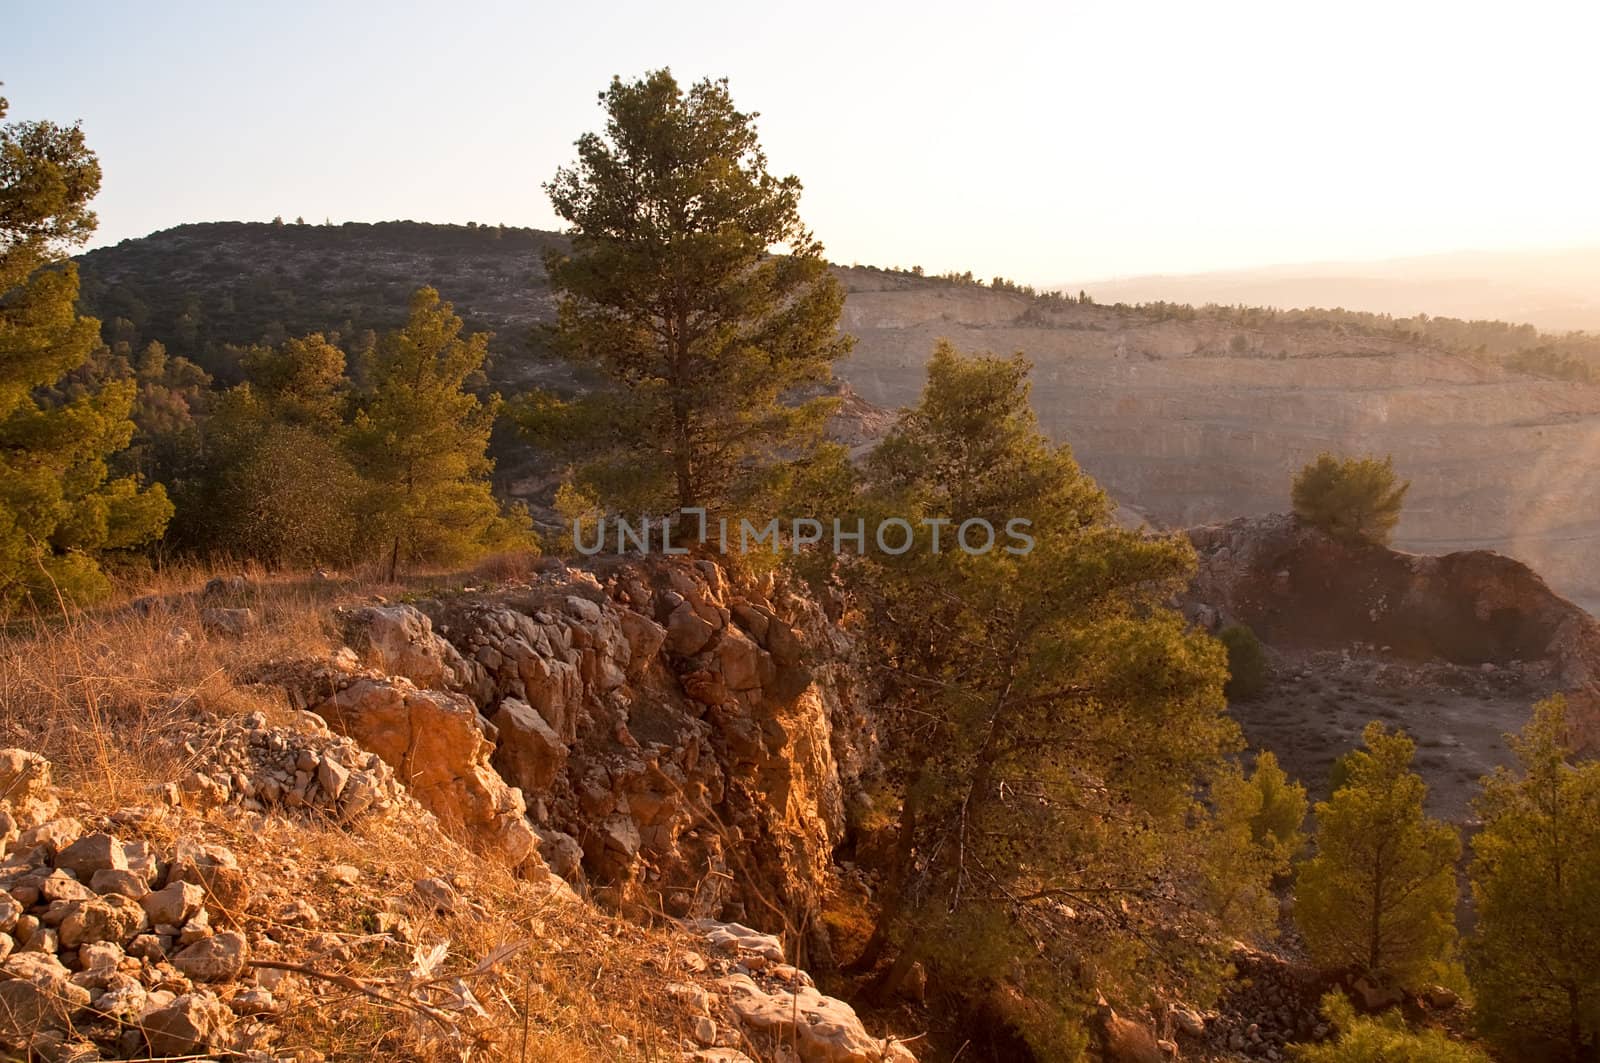 View of the forest in Israel. Area Jimal.